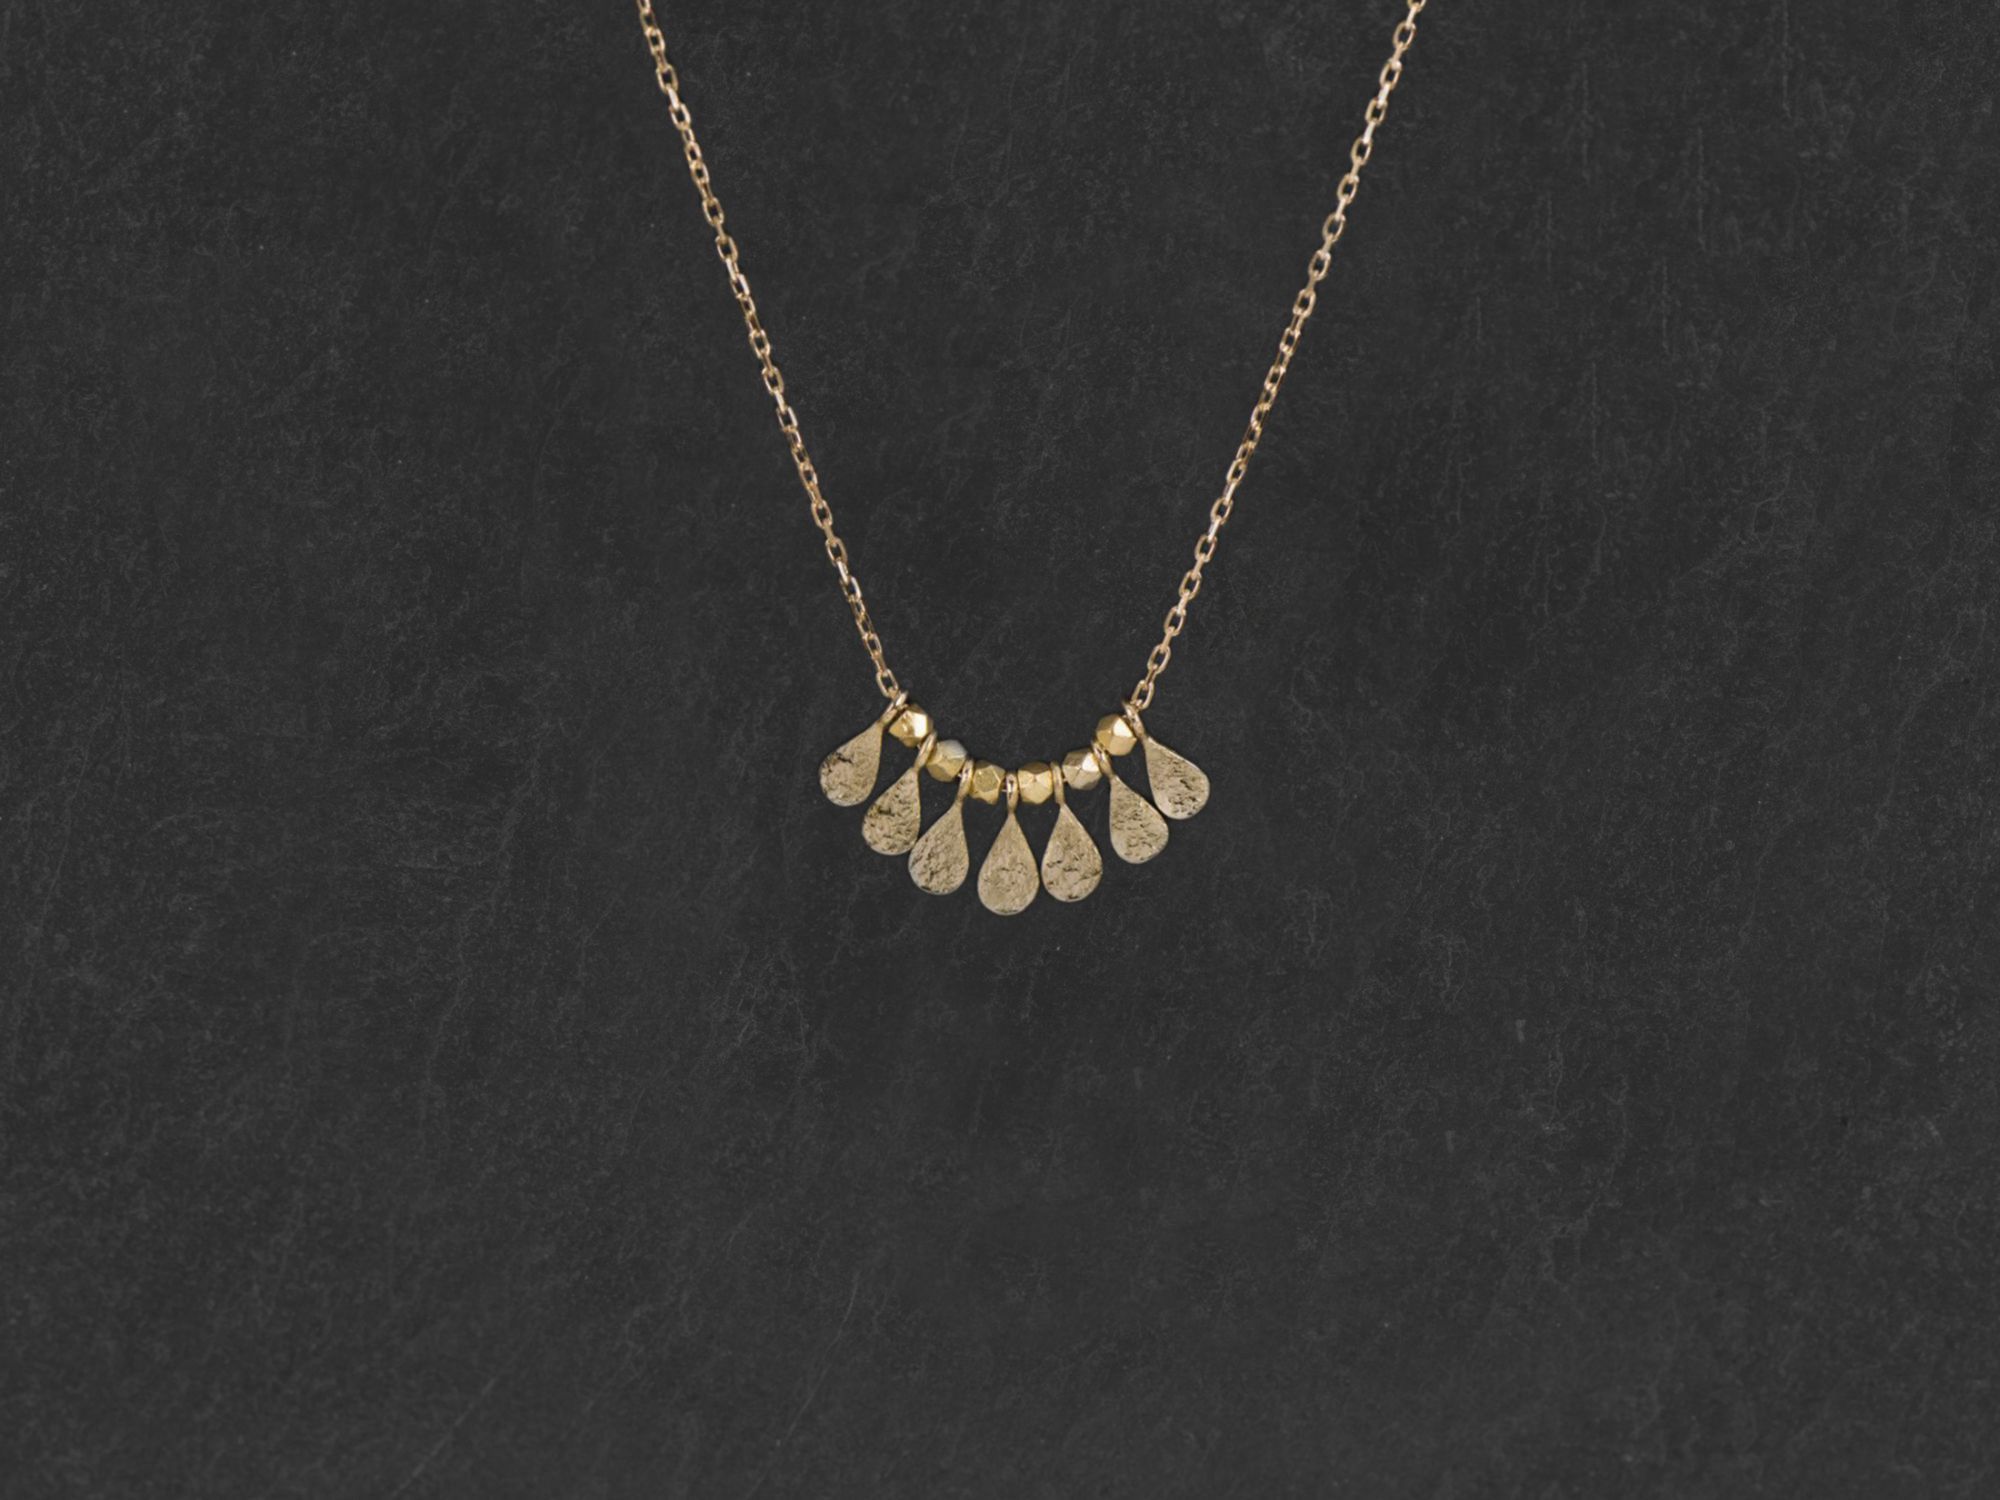 Java yellow gold necklace by Emmanuelle Zysman